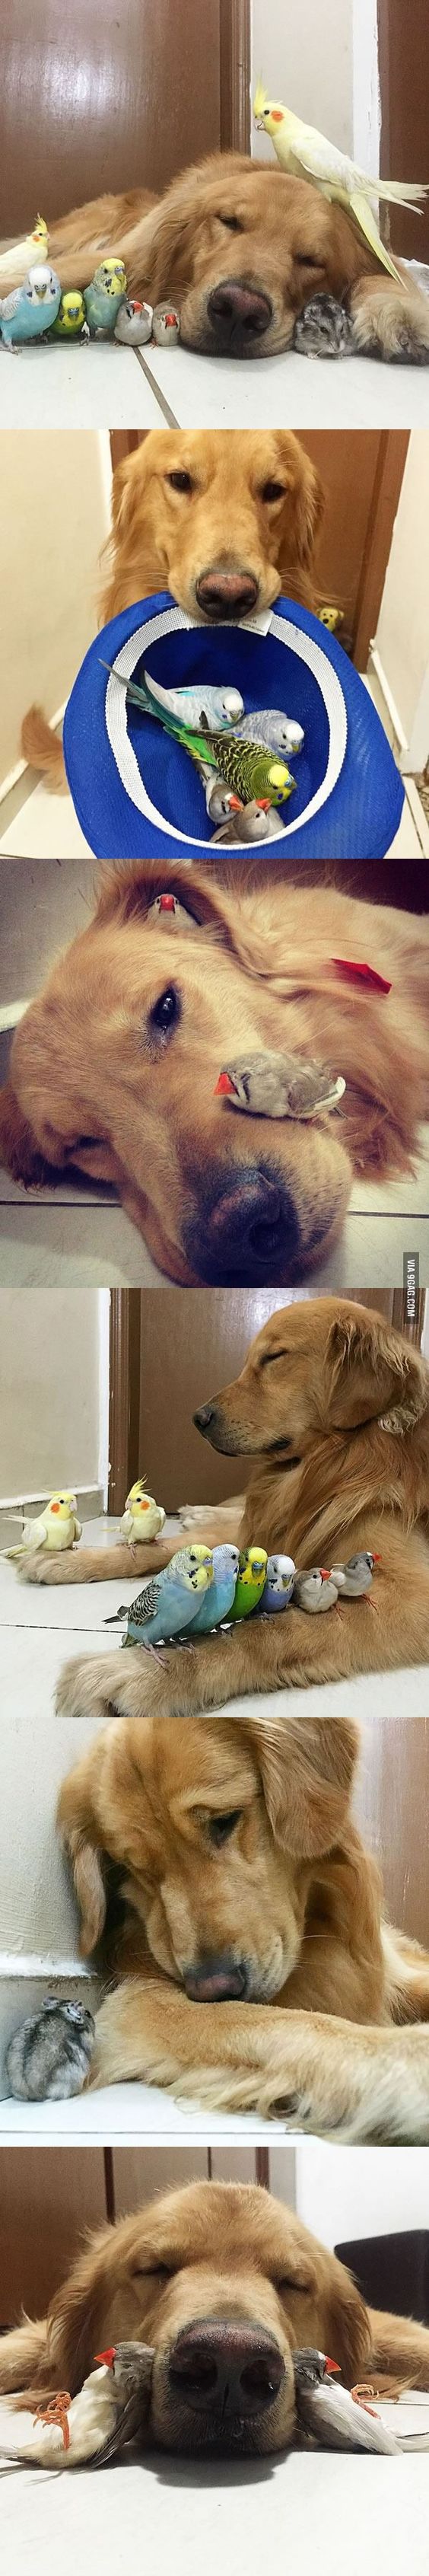 This Golden Retriever Is The Leader Of His Gang. 8 Birds And A Hamster Are The Other Members! - Barmy Pets